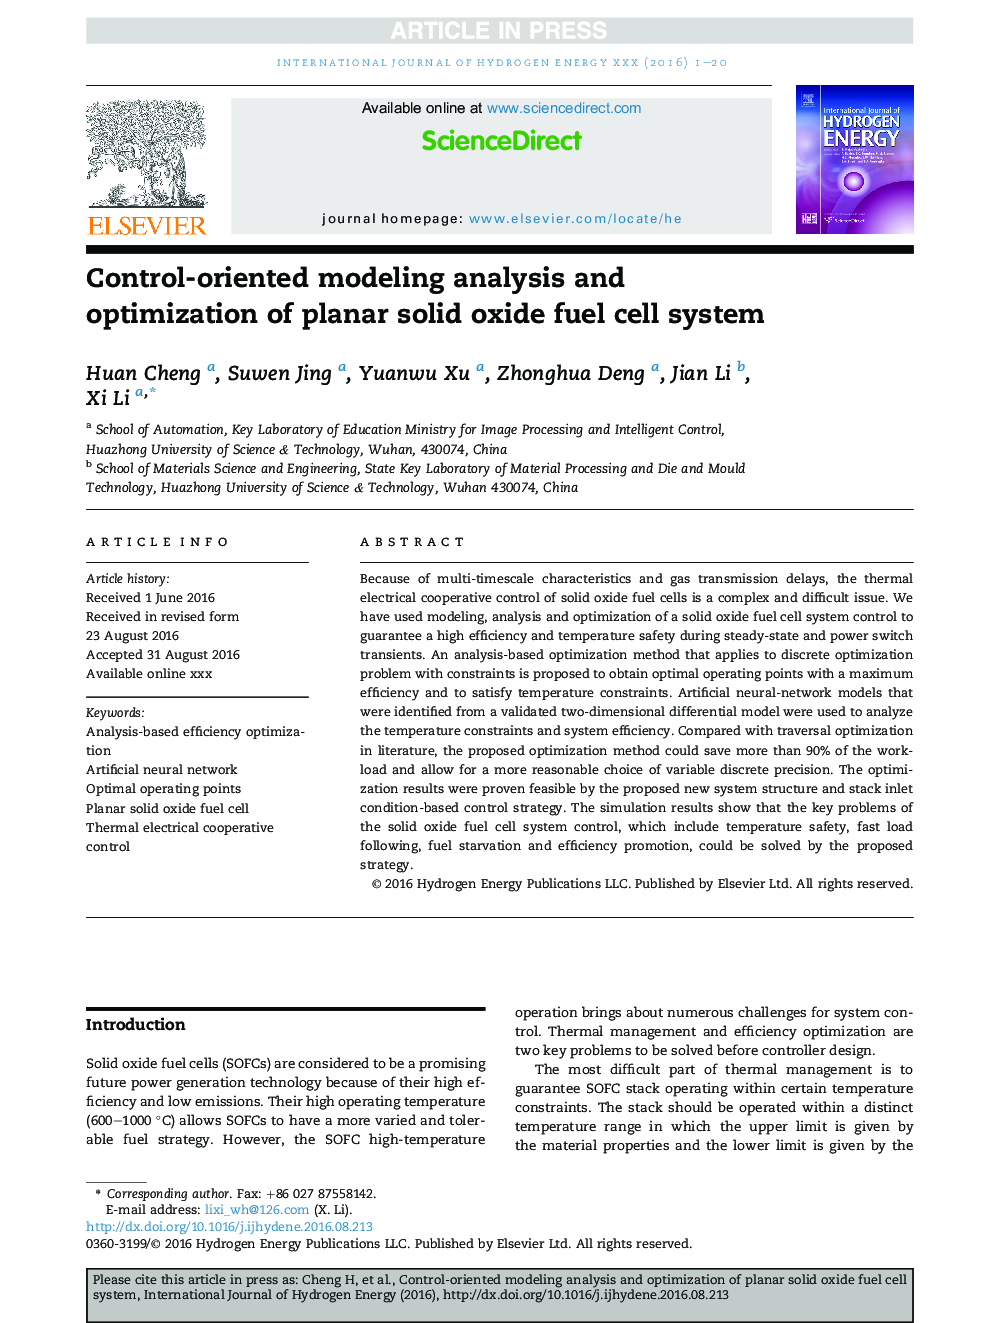 Control-oriented modeling analysis and optimization of planar solid oxide fuel cell system